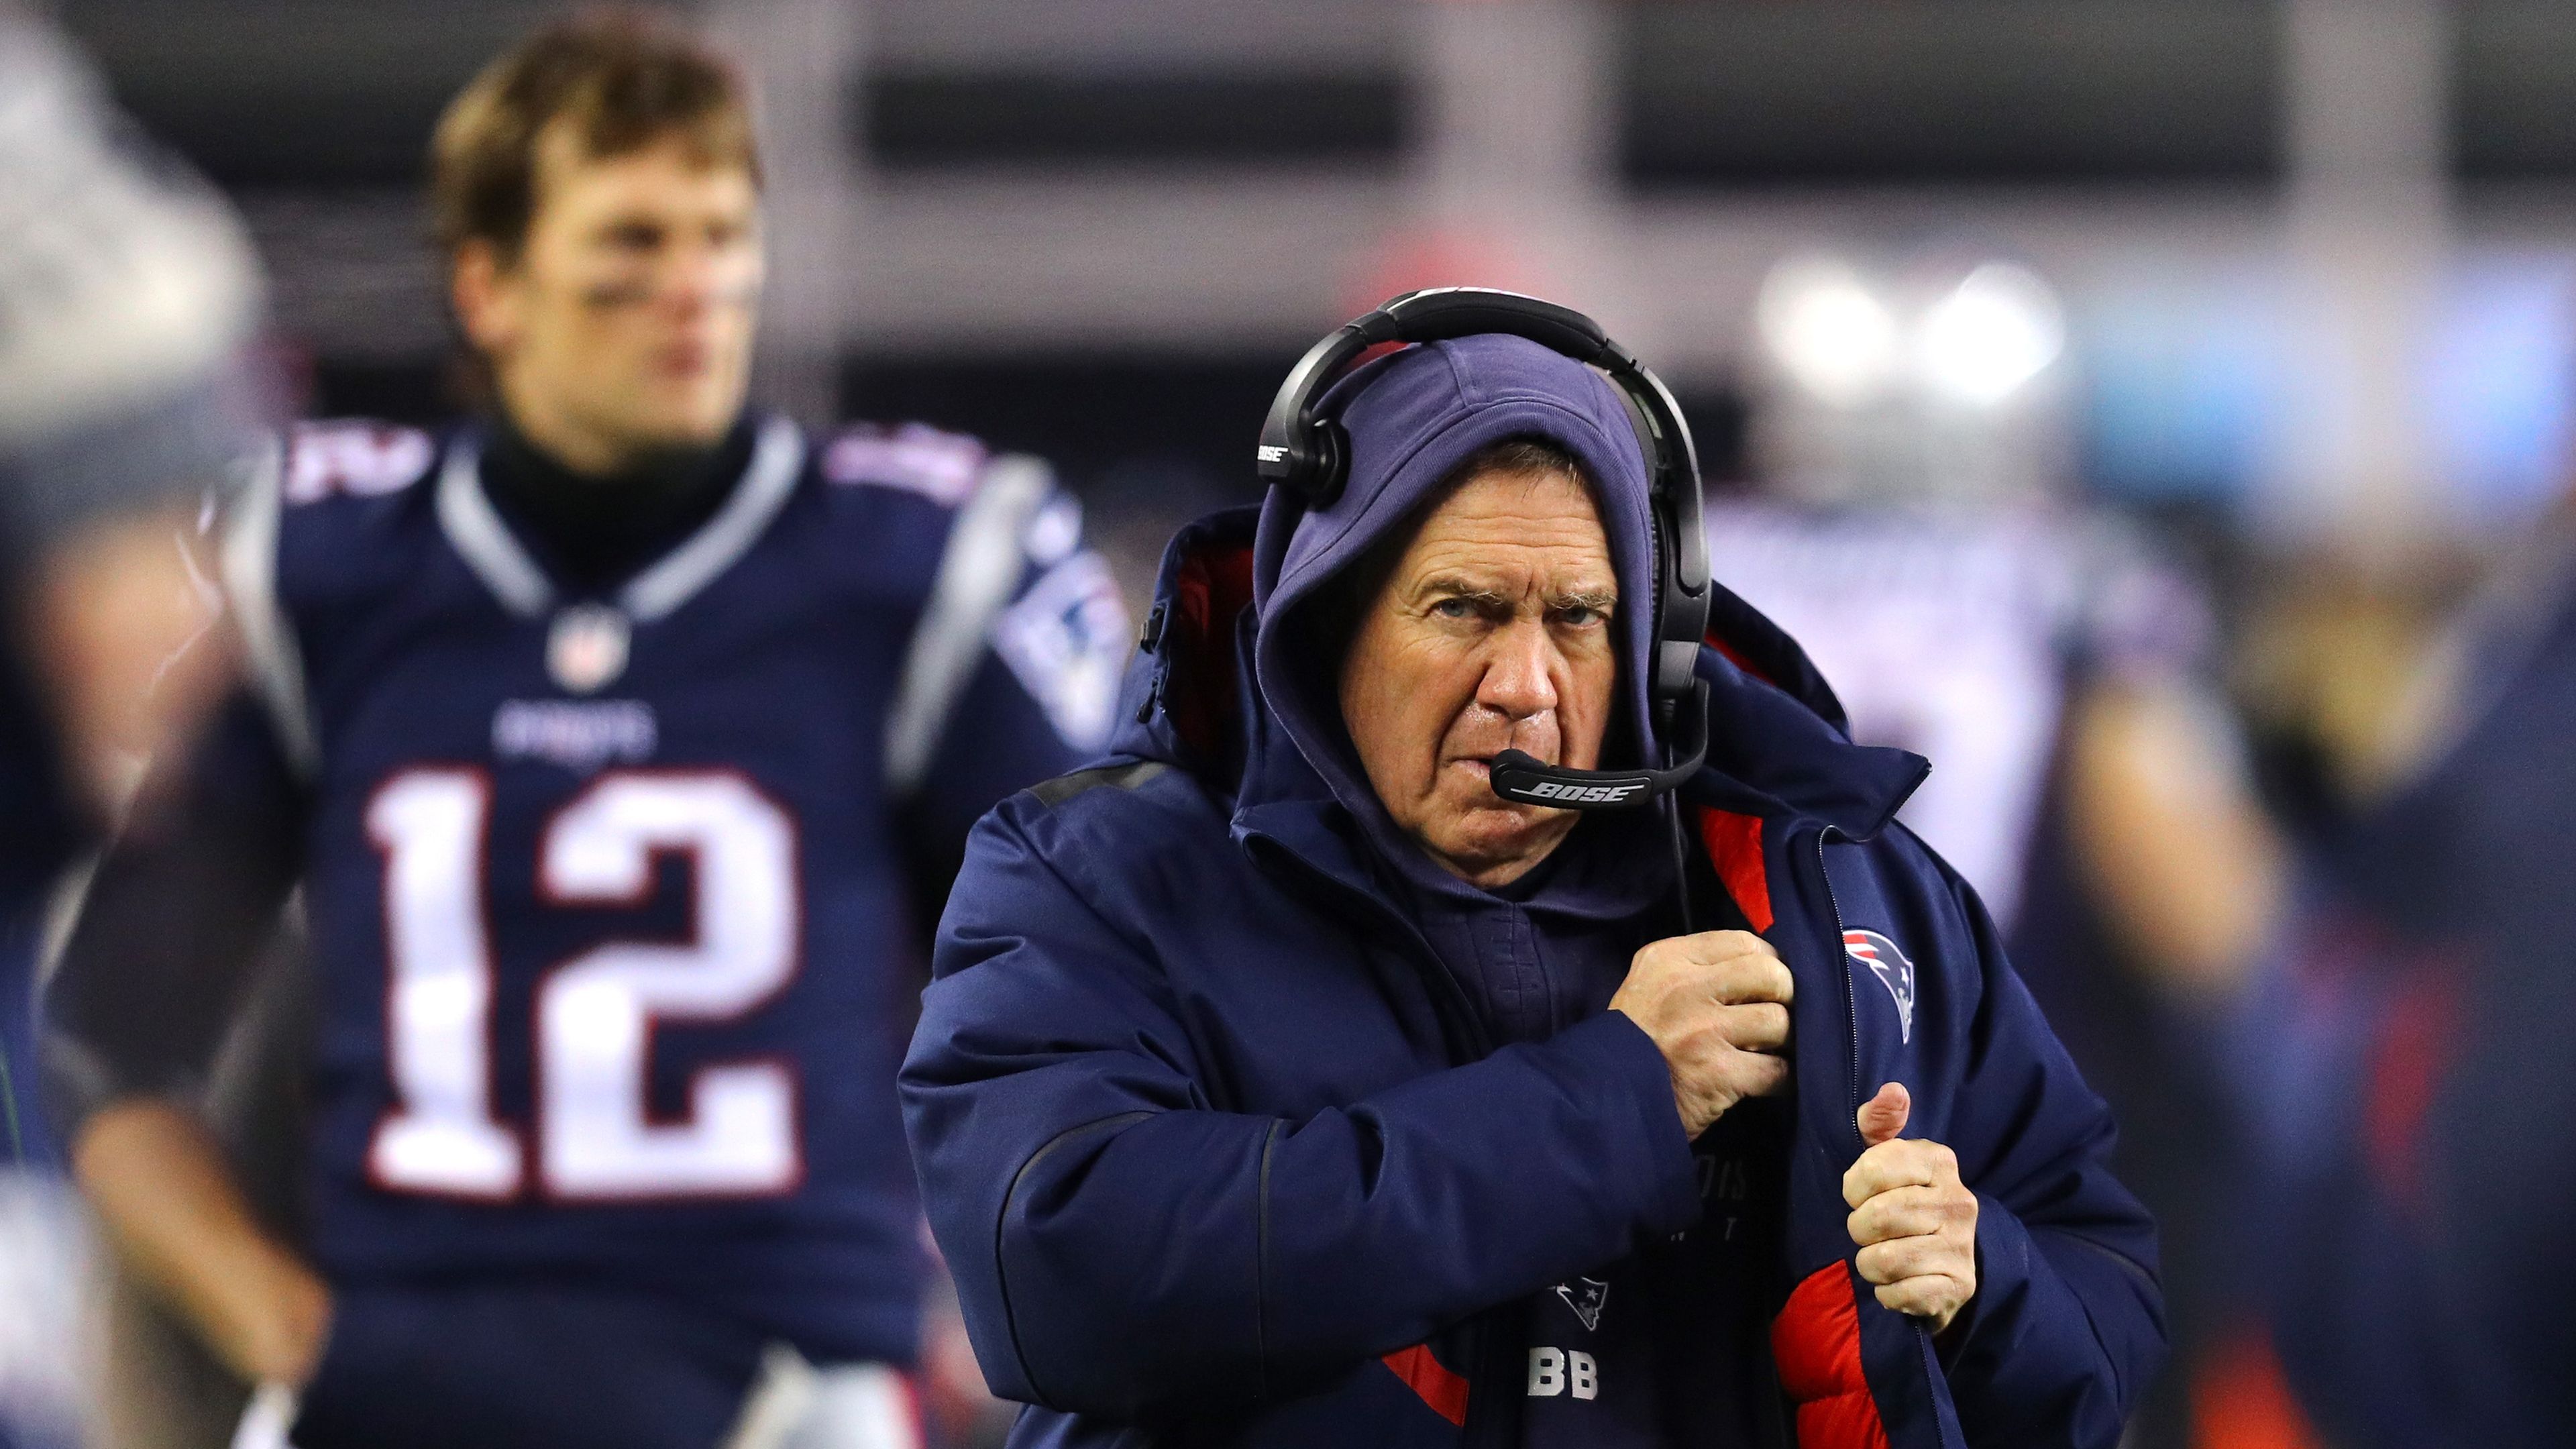 Internet piles on Bill Belichick after Tom Brady reaches another Super Bowl without him